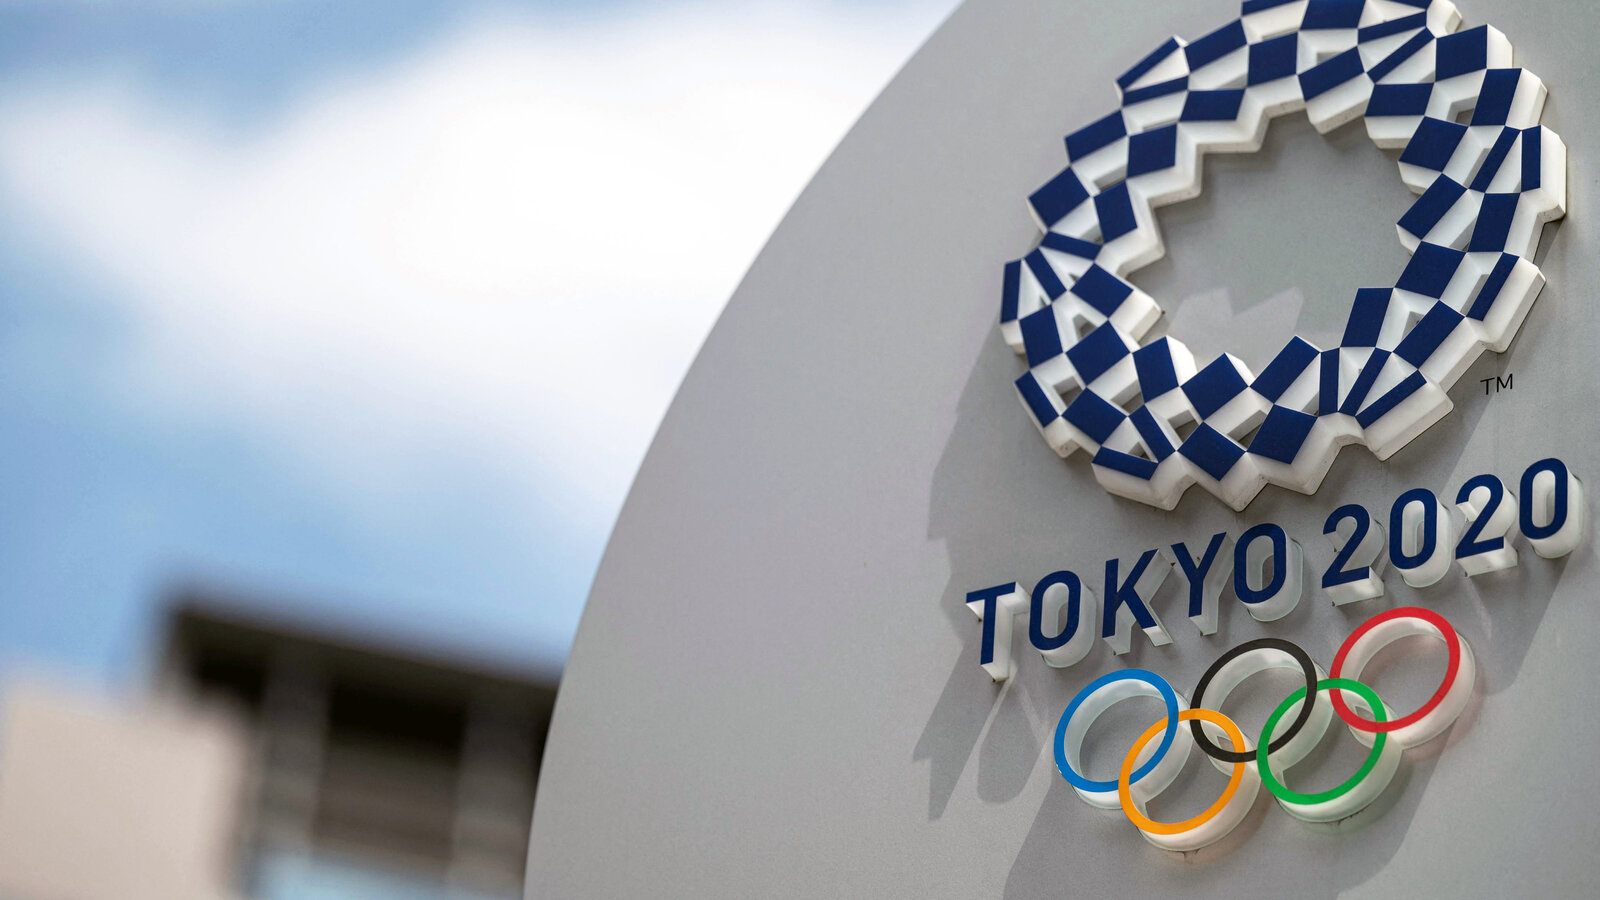 The International Olympic Committee sets “Faster, Higher, Stronger-Together” as the new motto for Tokyo Olympics